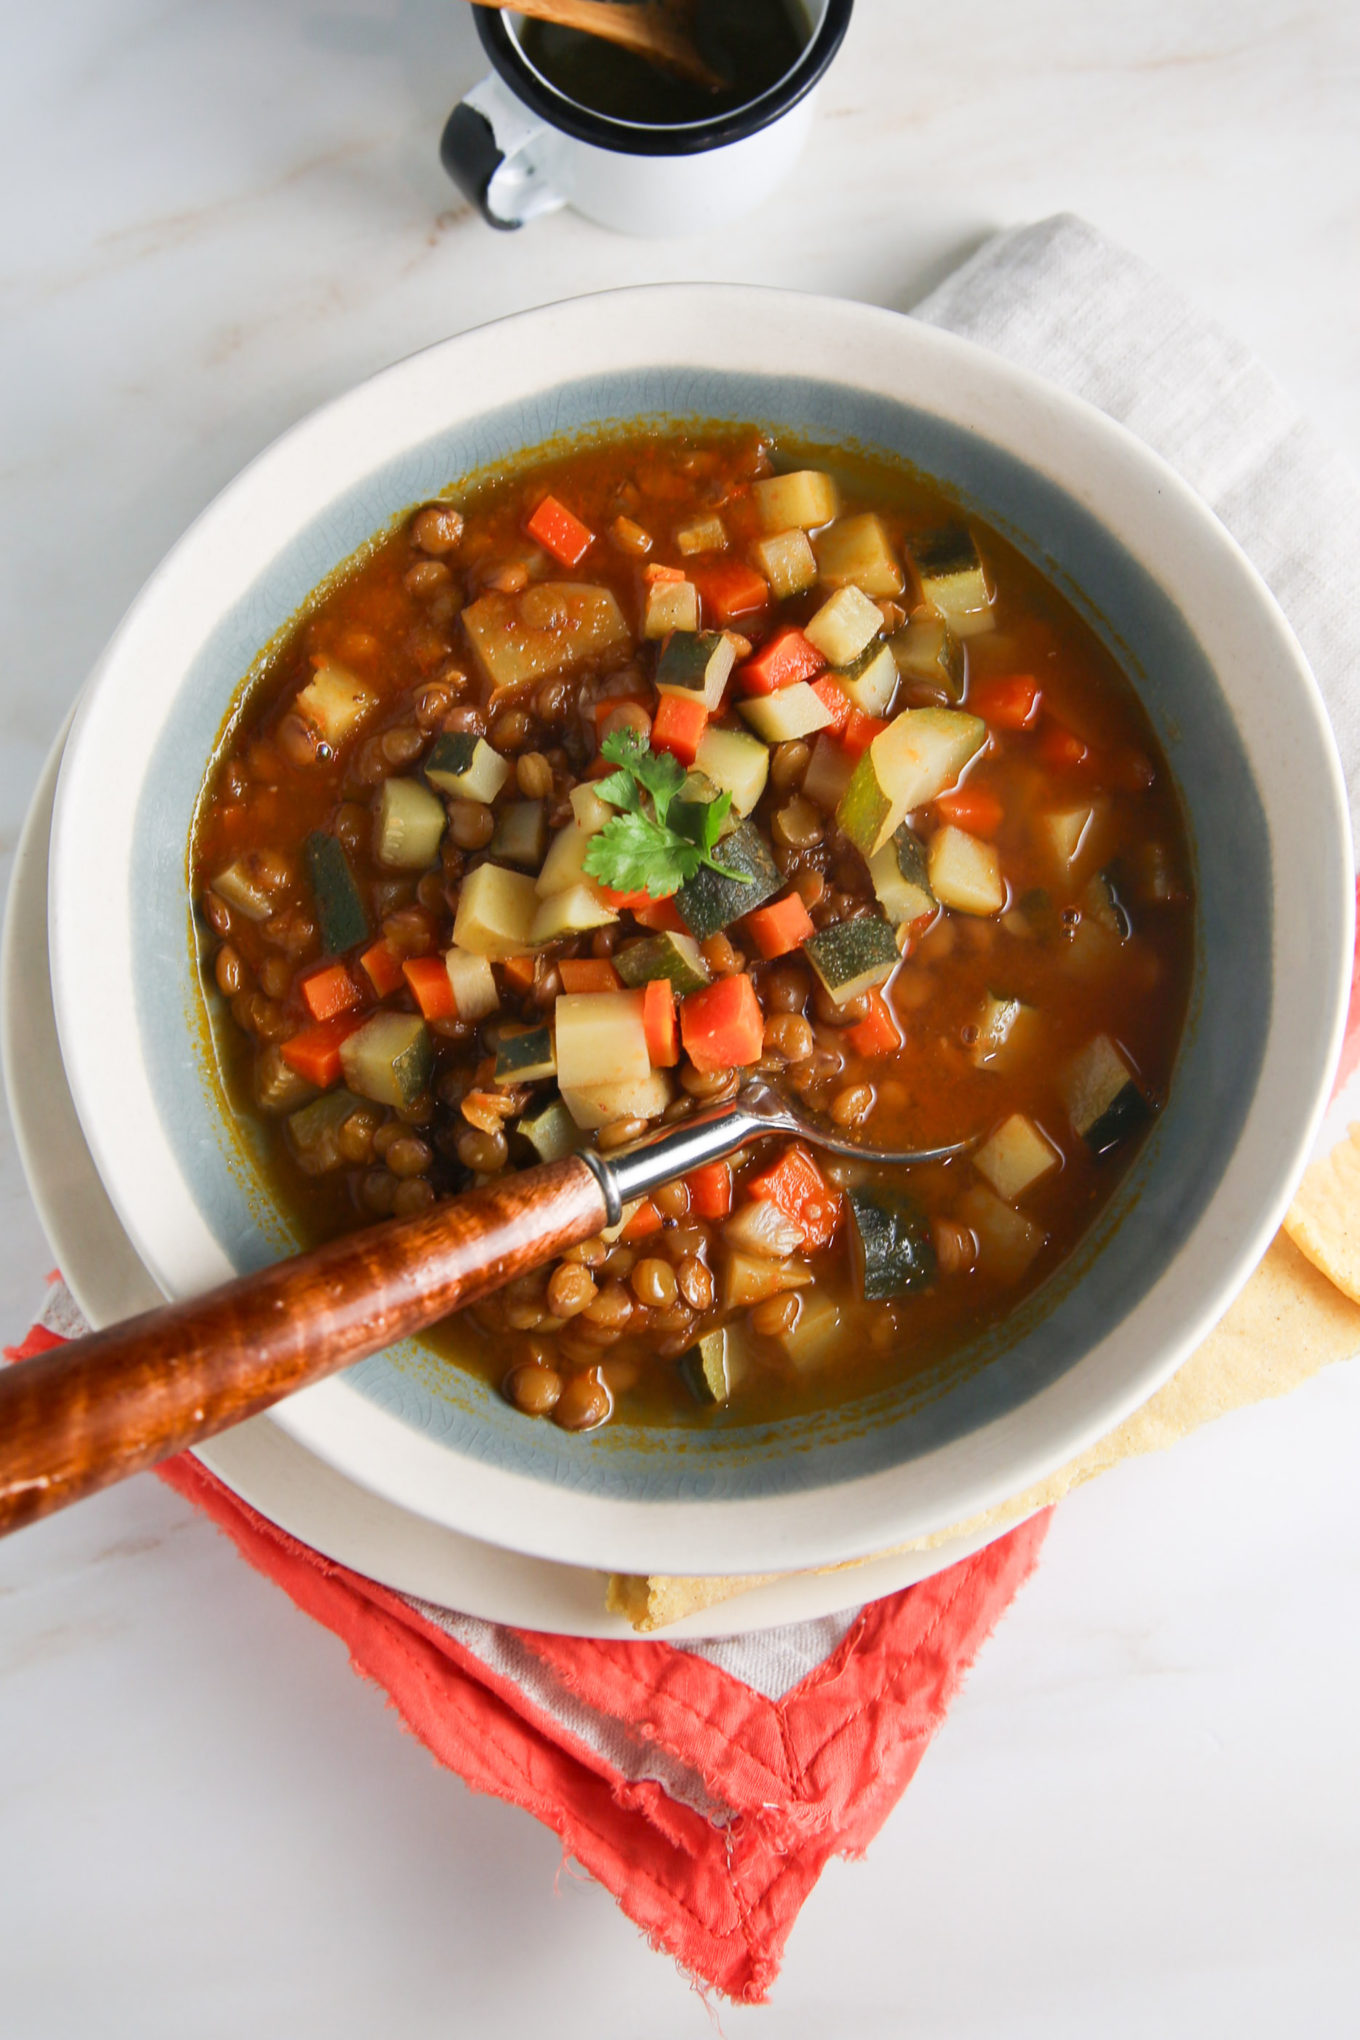 A bowl of lentil soup with vegetables and a spoon.